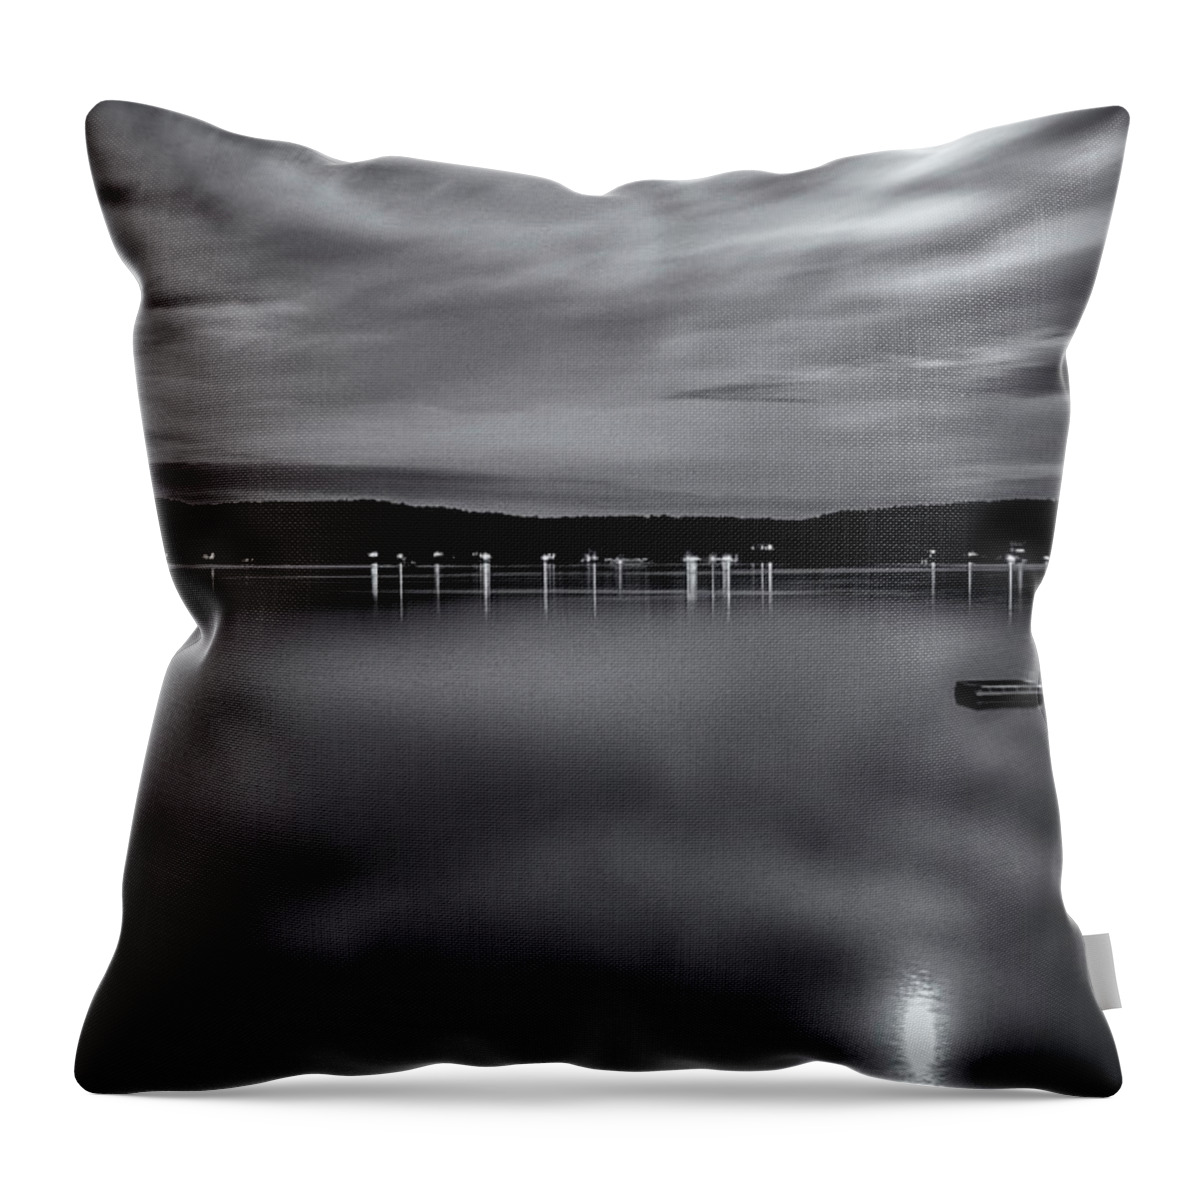 Spofford Lake New Hampshire Throw Pillow featuring the photograph Spofford Lake Moon by Tom Singleton